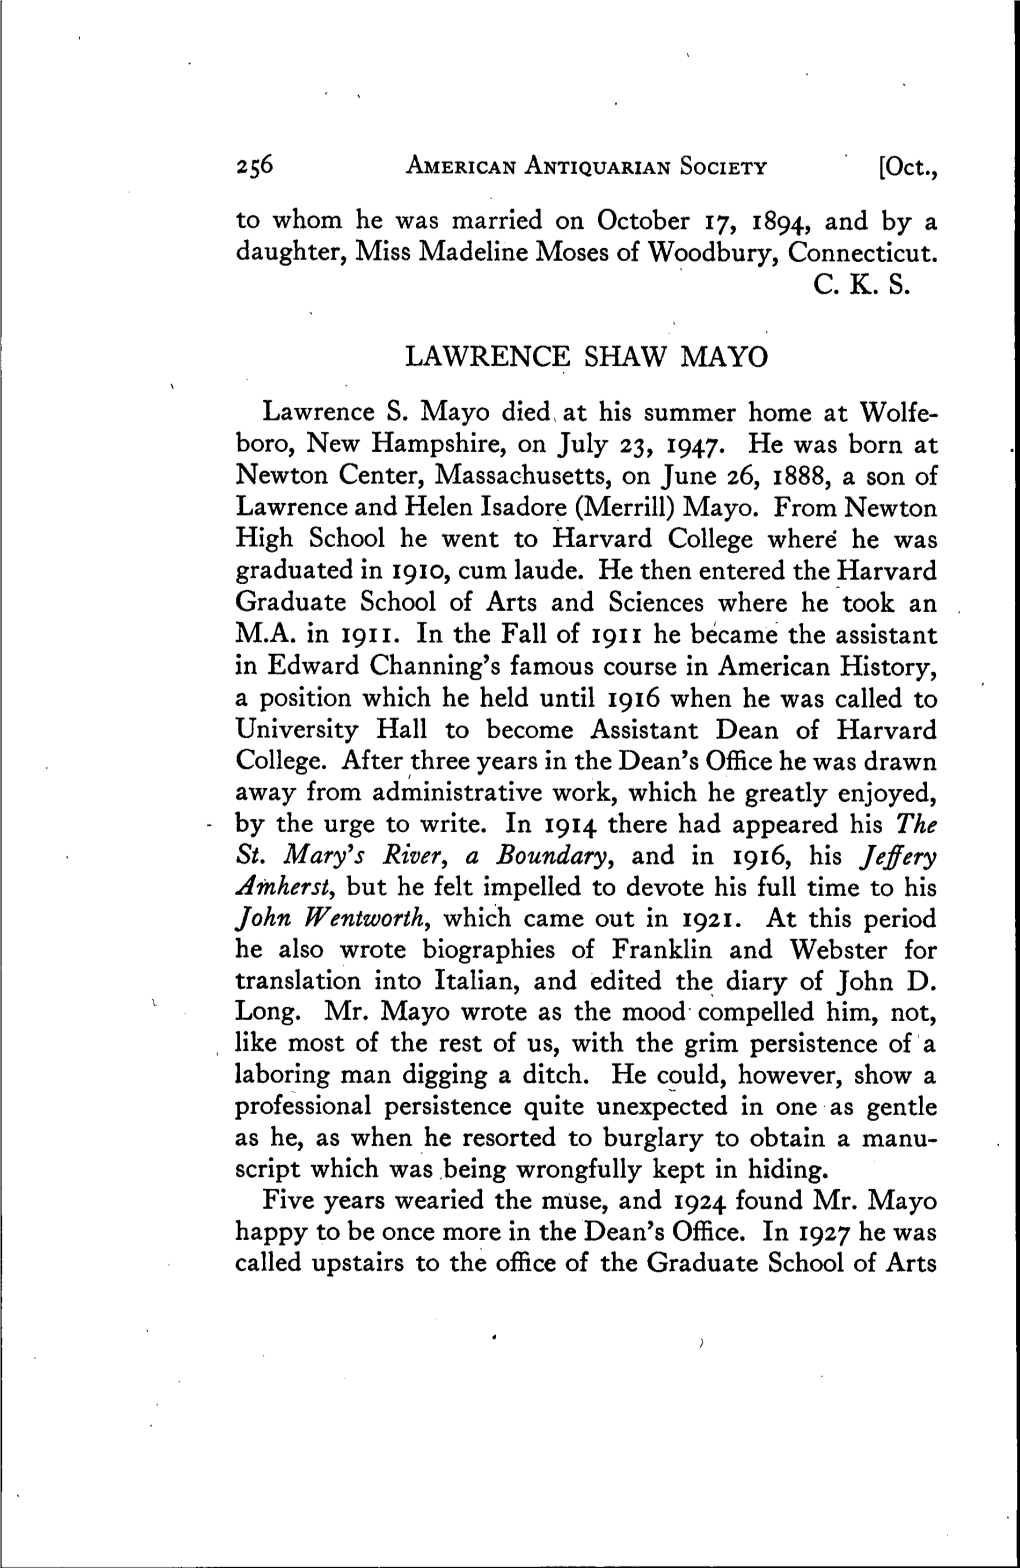 To Whom He Was Married on October 17, 1894, and by a Daughter. Miss Madeline Moses of Woodbury, Connecticut. C. K. S. LAWRENCE S